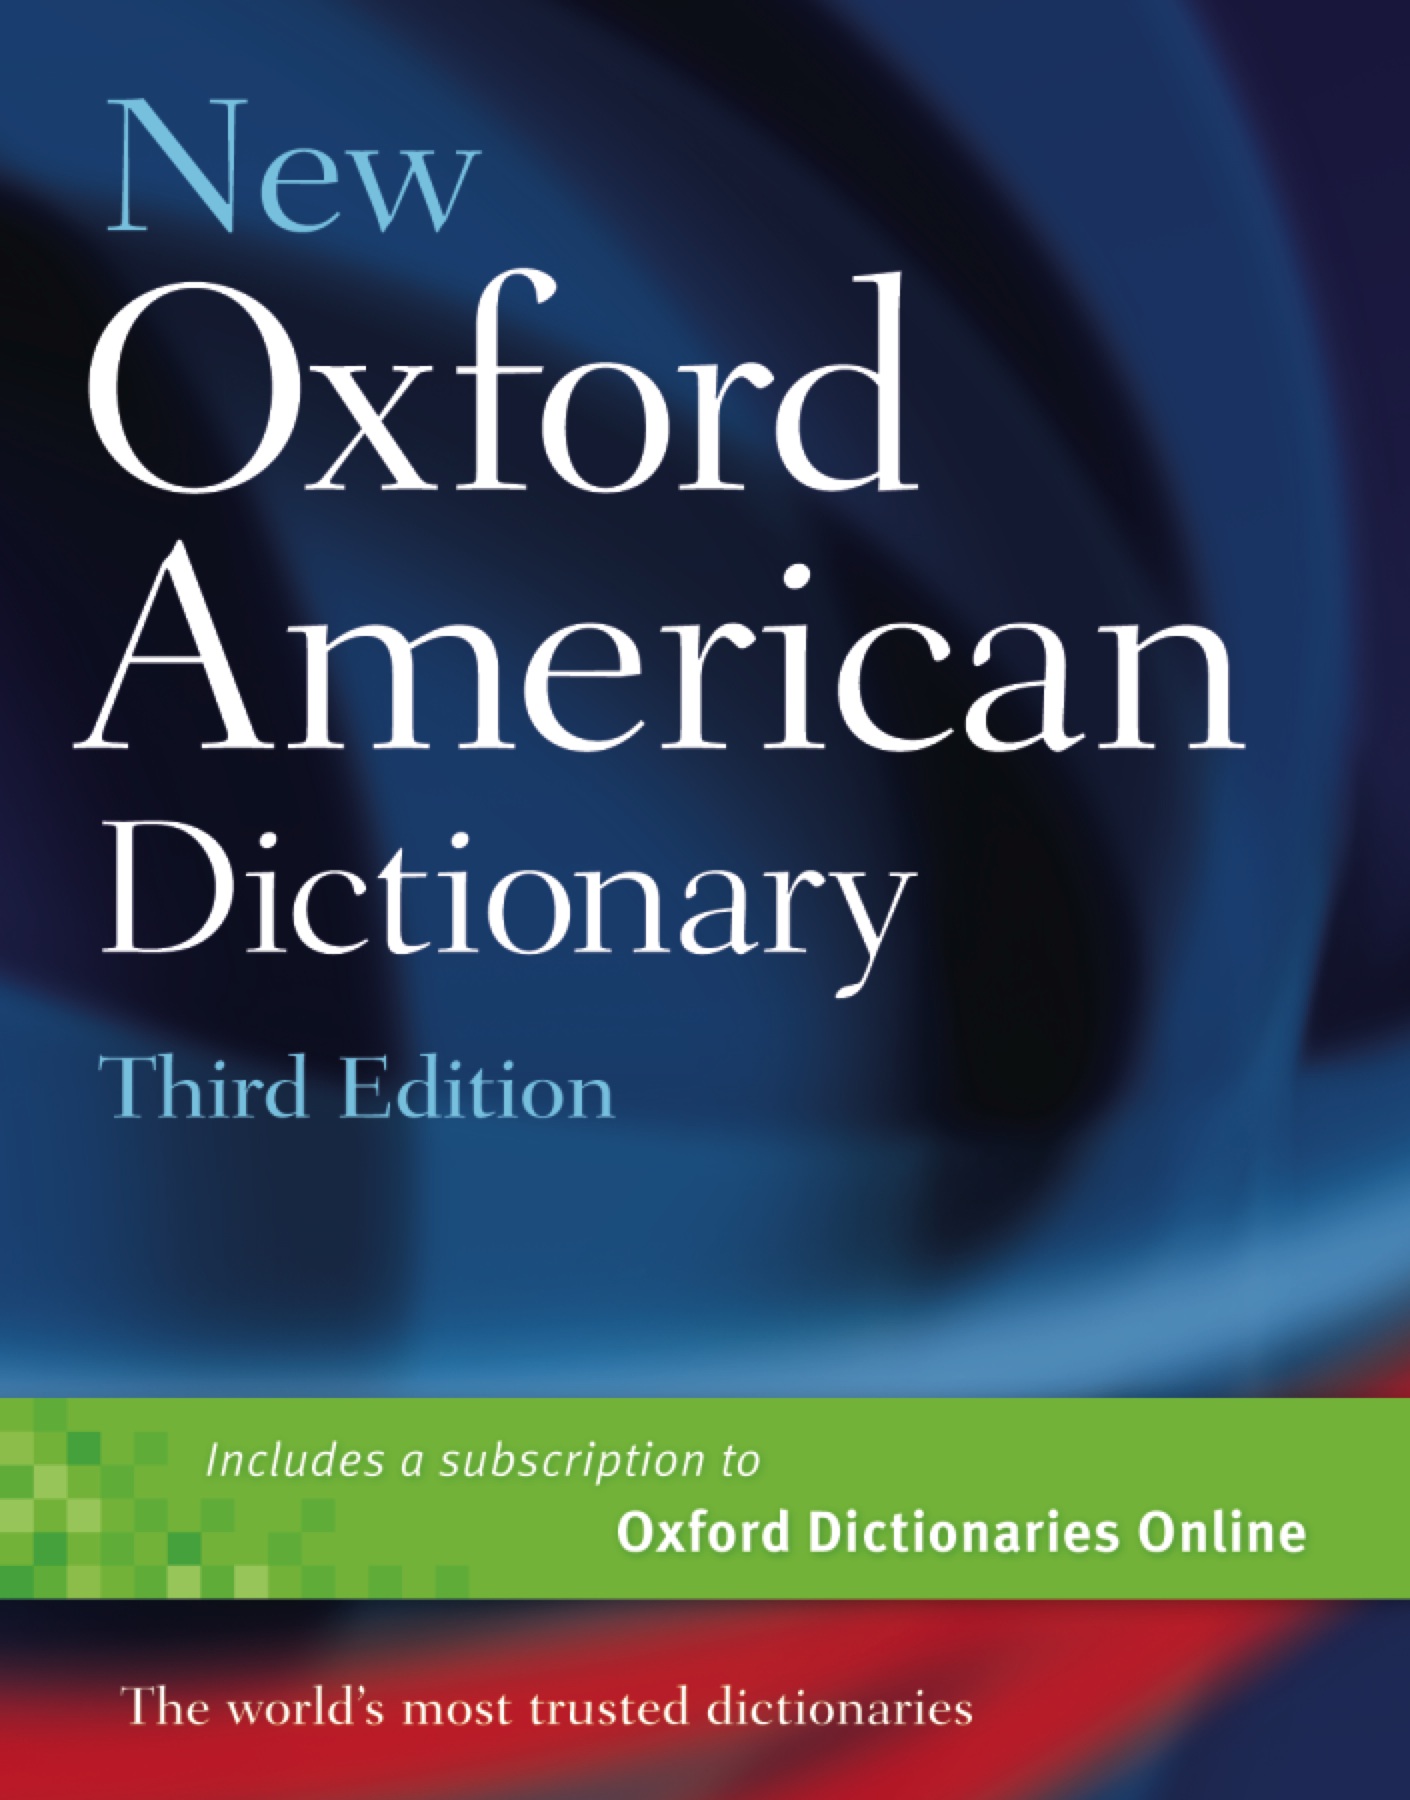 New Oxford American Dictionary Download For Mac